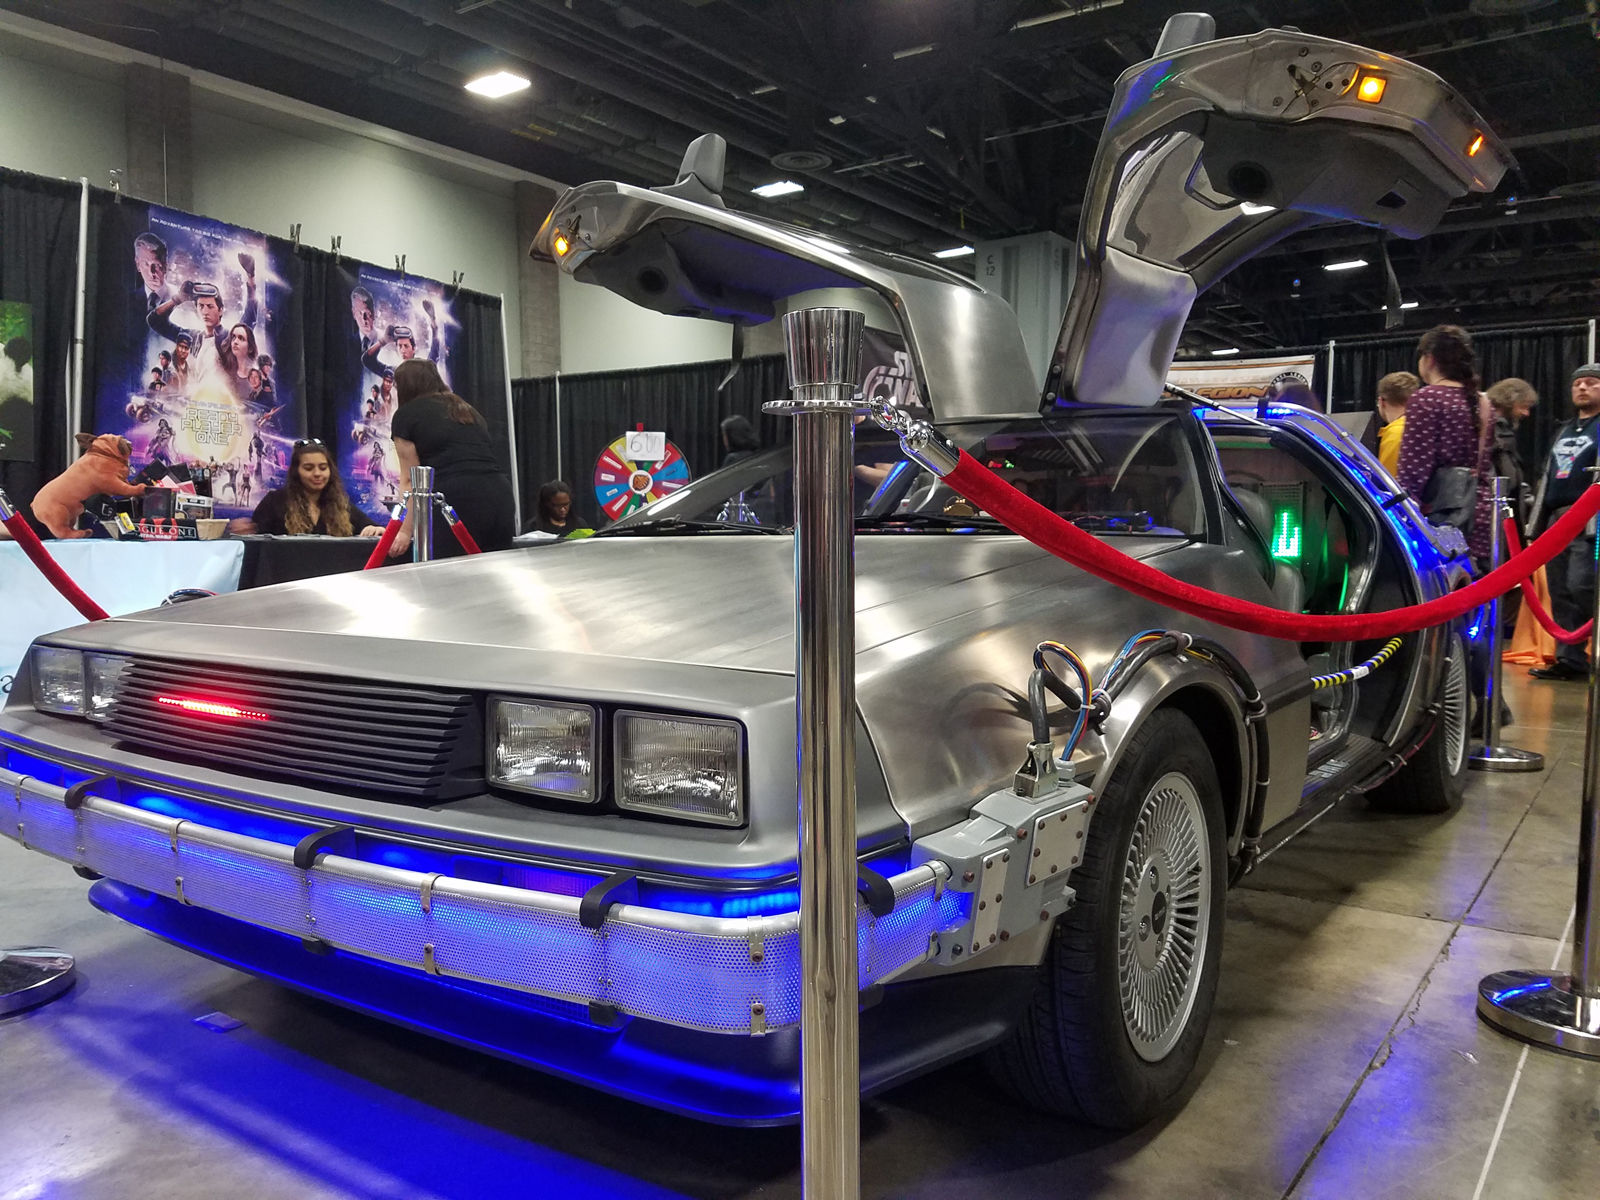 The DeLorean from "Back to the Future." (WTOP/Will Vitka)